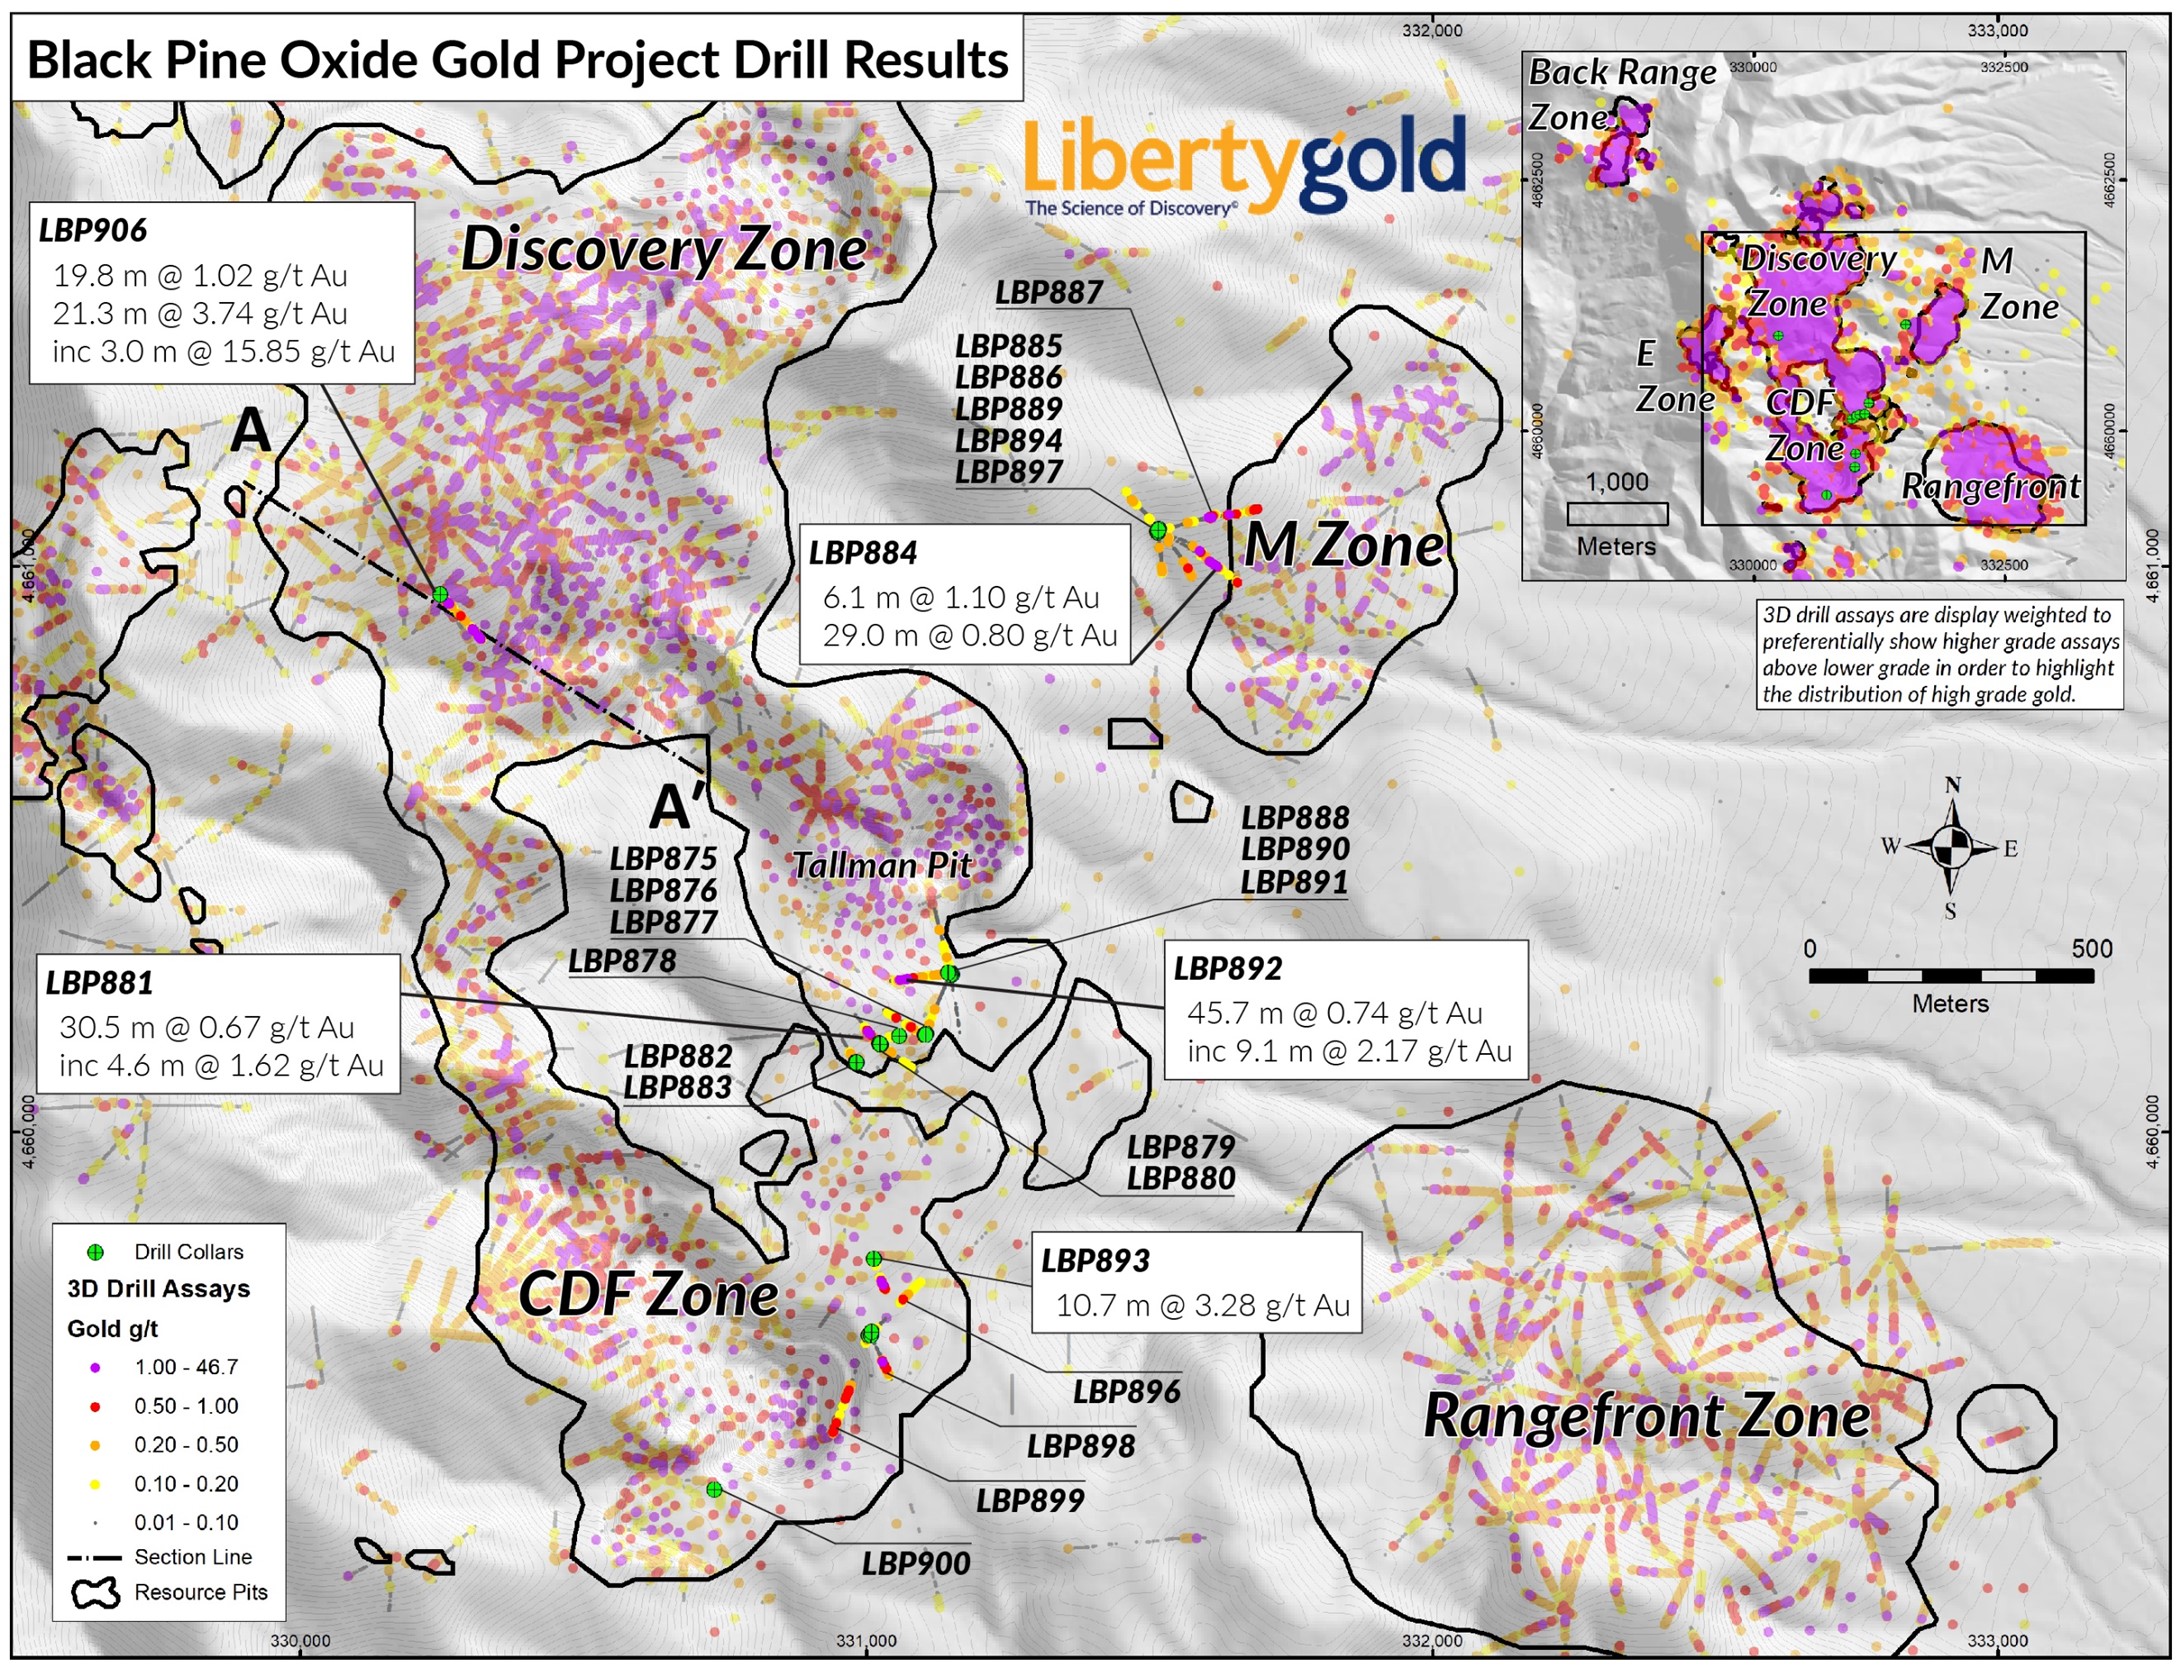 Liberty Gold Reports Additional High-Grade Drill Results from the Black Pine Oxide Gold Project, Idaho